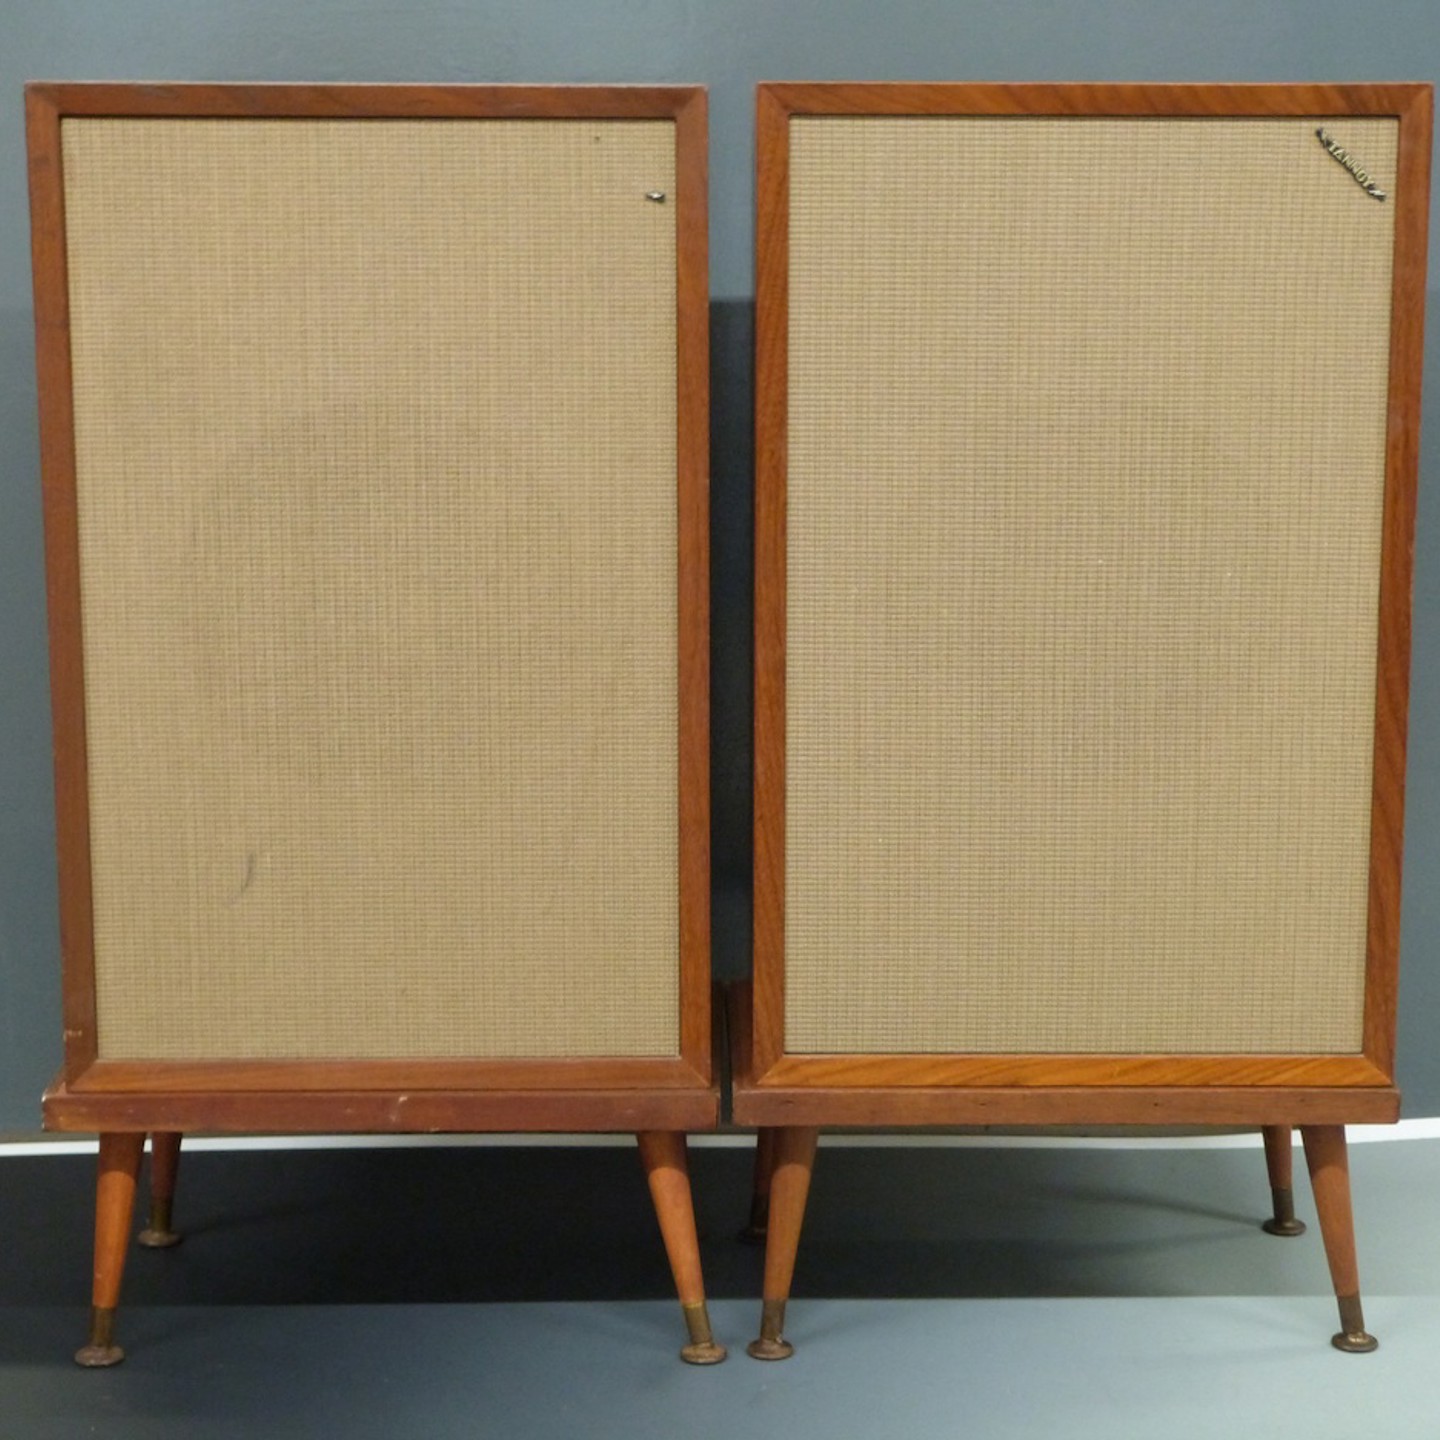 A Pair Of Tannoy Speakers LSUHF3LZ G8U With Matching Stands Sold Ś750